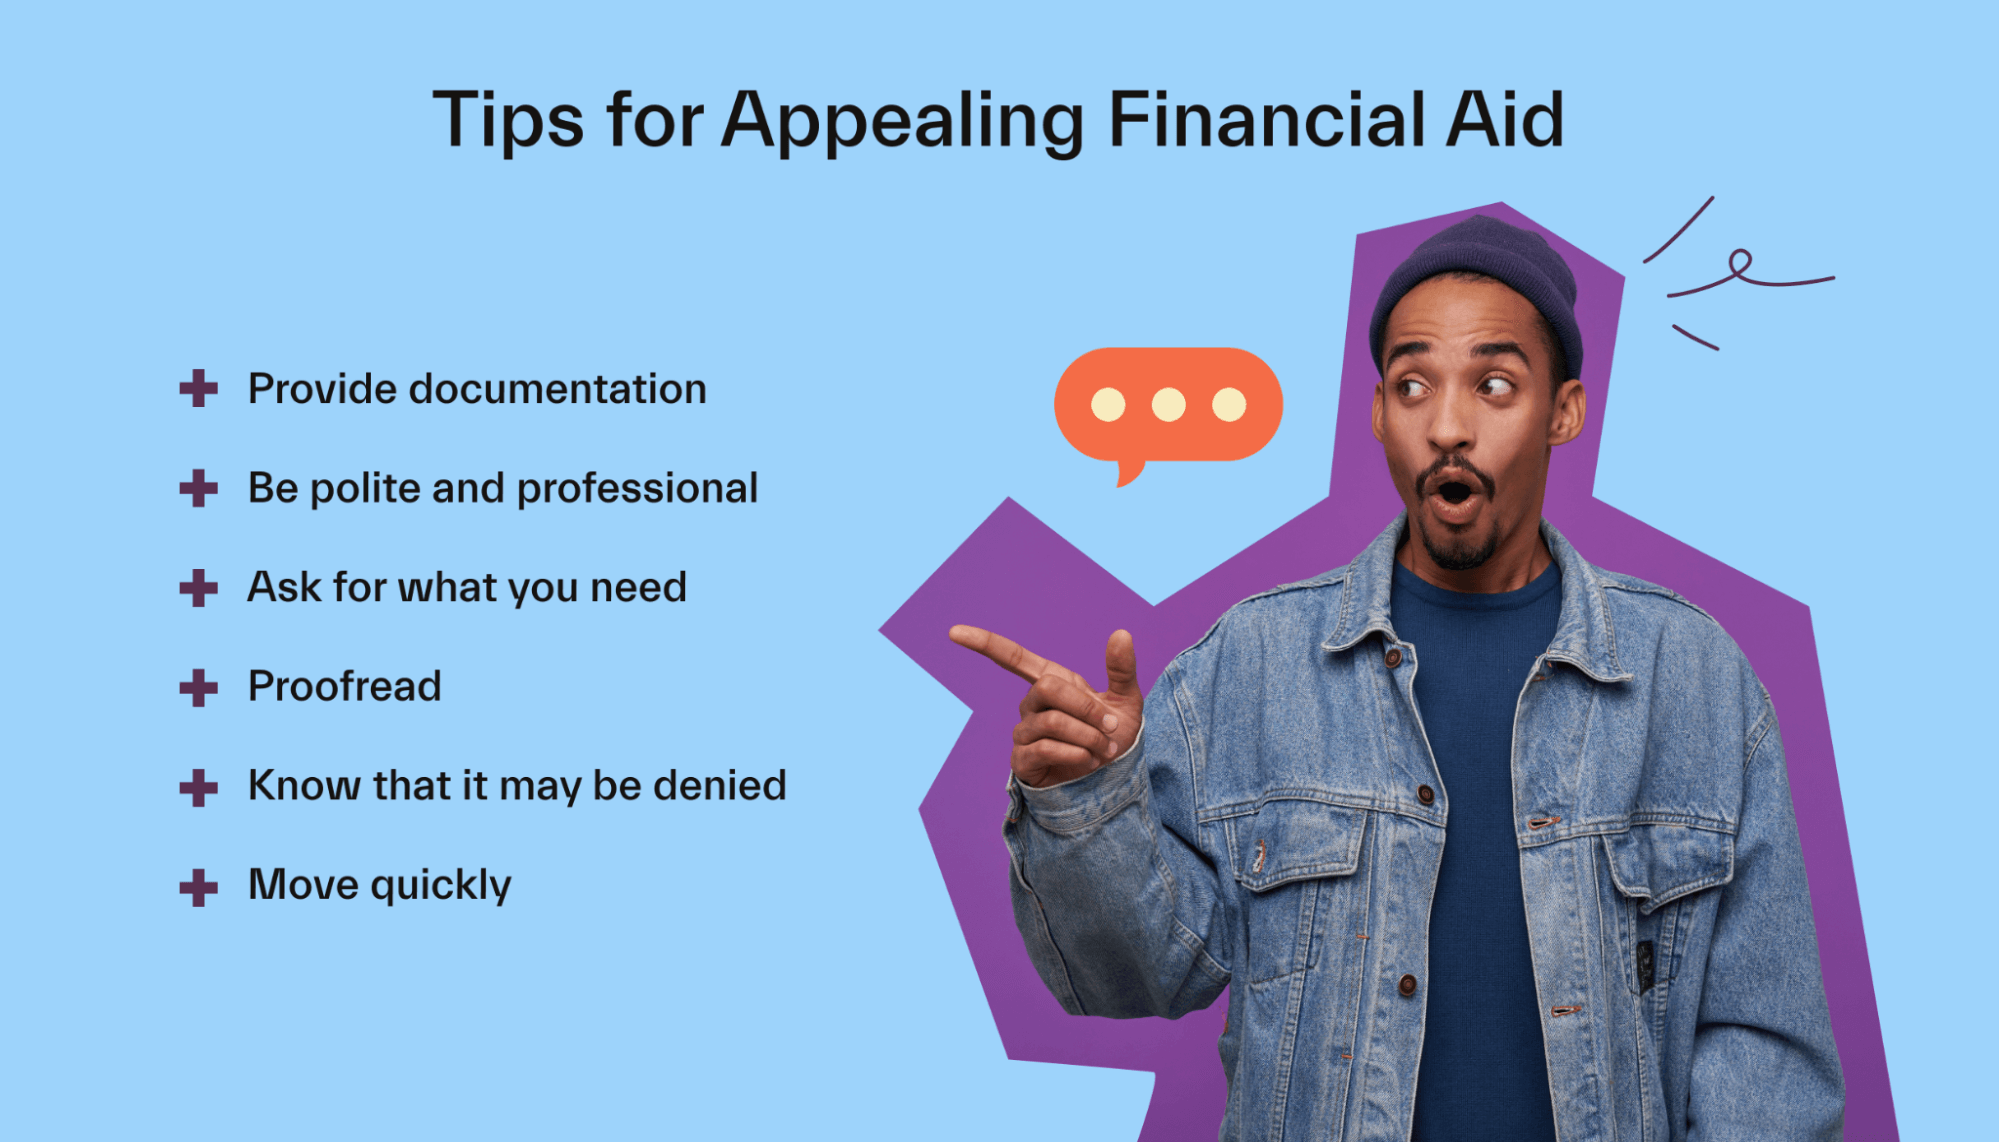 Tips for Appealing Financial Aid